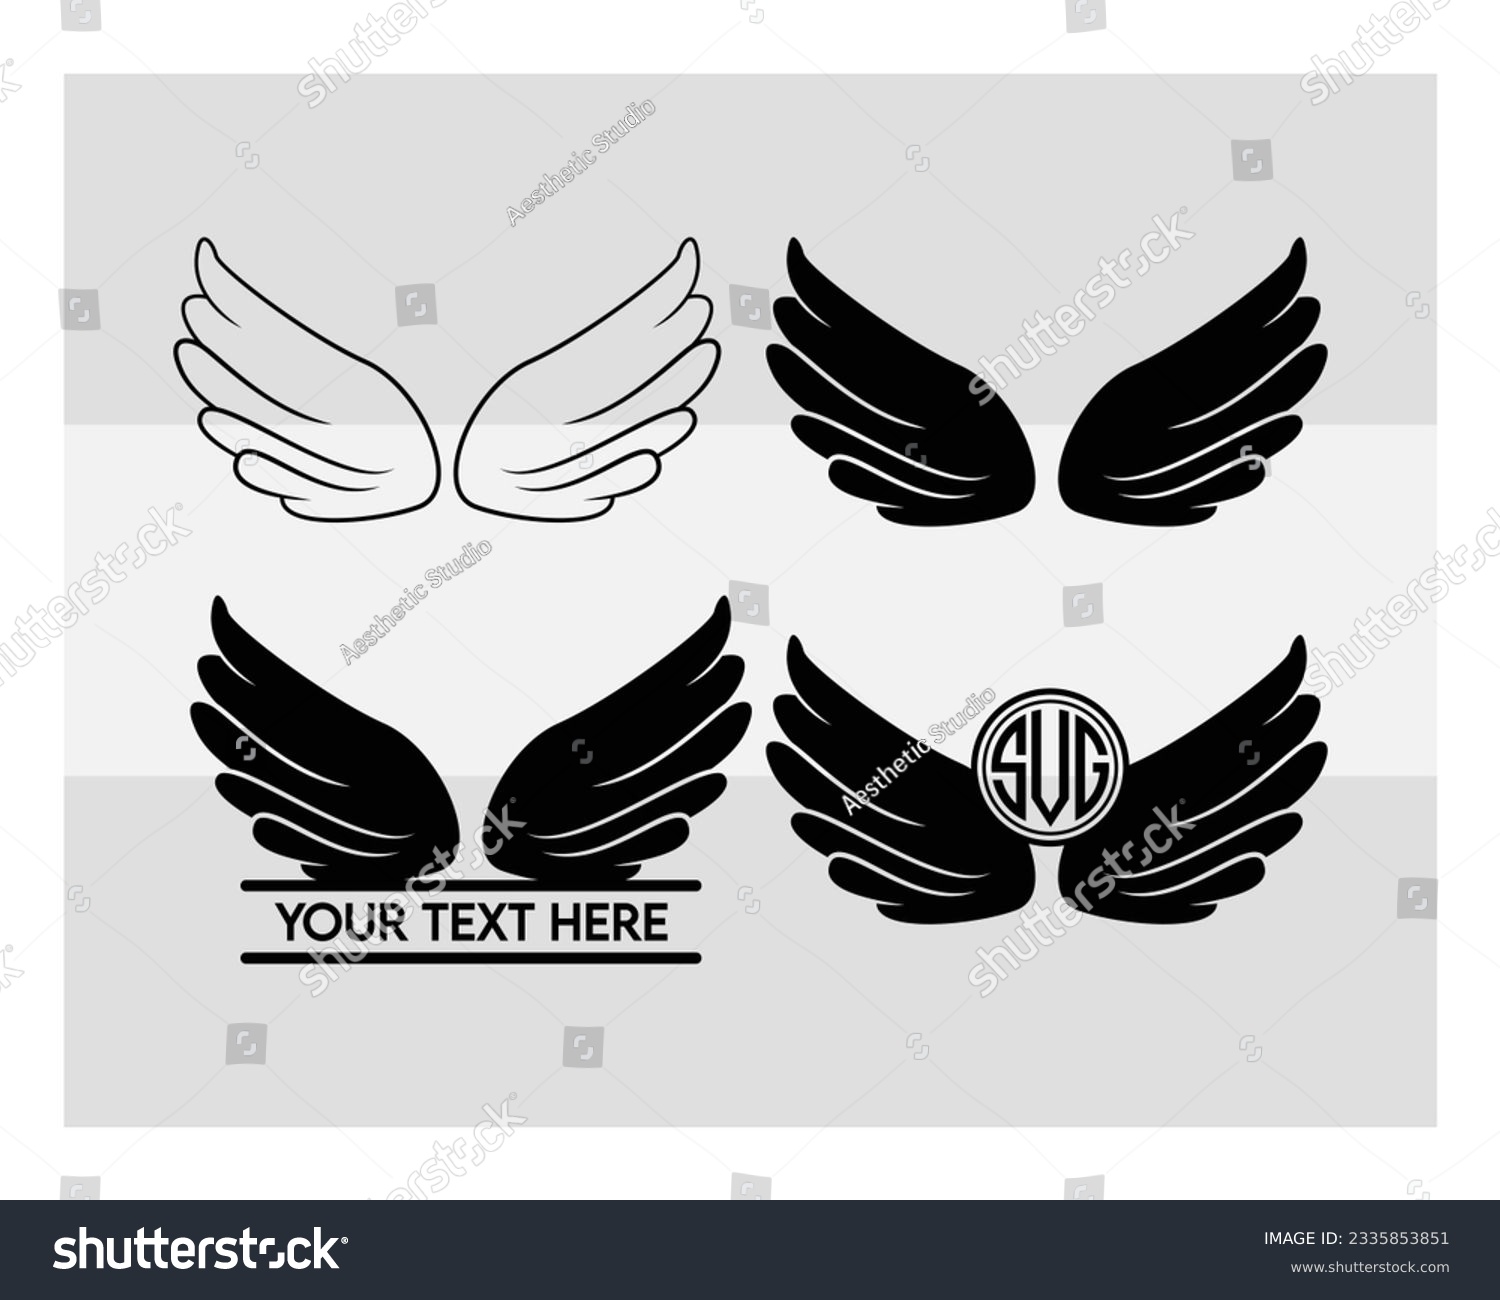 SVG of Angel Wings Svg, SVG Bundle, Angel Wings, Angel Clipart Svg, Circut Cut Files Silhouette, Memoria, Heart Svg, Silhouette, Angel Wing Clipart, Vcetor, Outline, Eps, Cut file svg